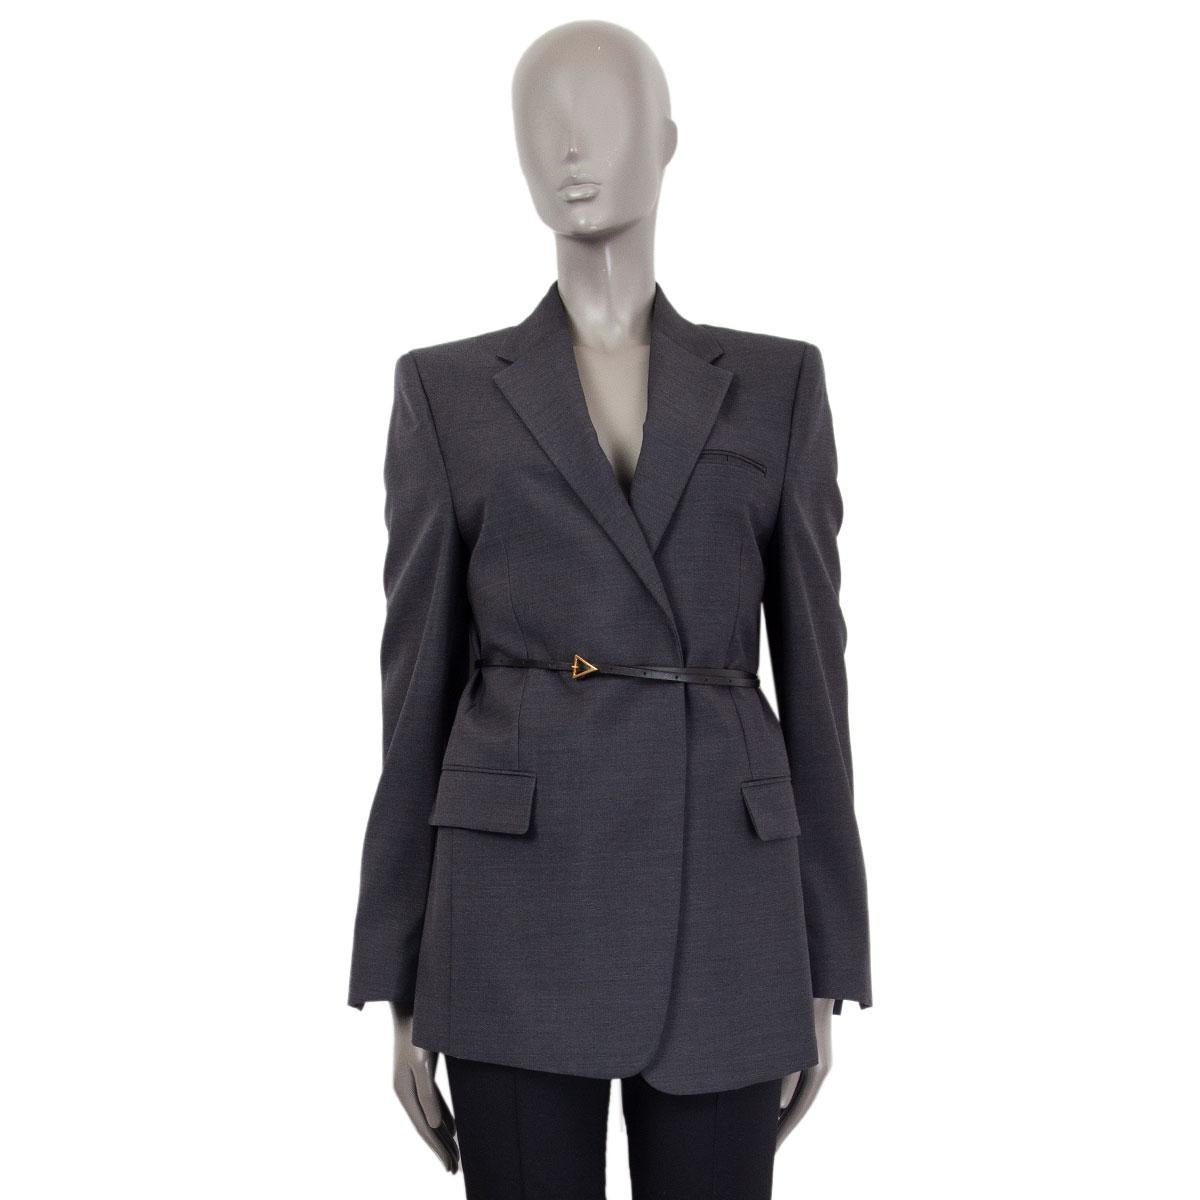 Bottega Veneta belted wool blazer in dark grey wool (100%) with one chest pocket and two front flap pockets. Closes on the front with a leather belt with a gold tone triangular buckle. Lined in silk (100%). Has been worn and is in excellent